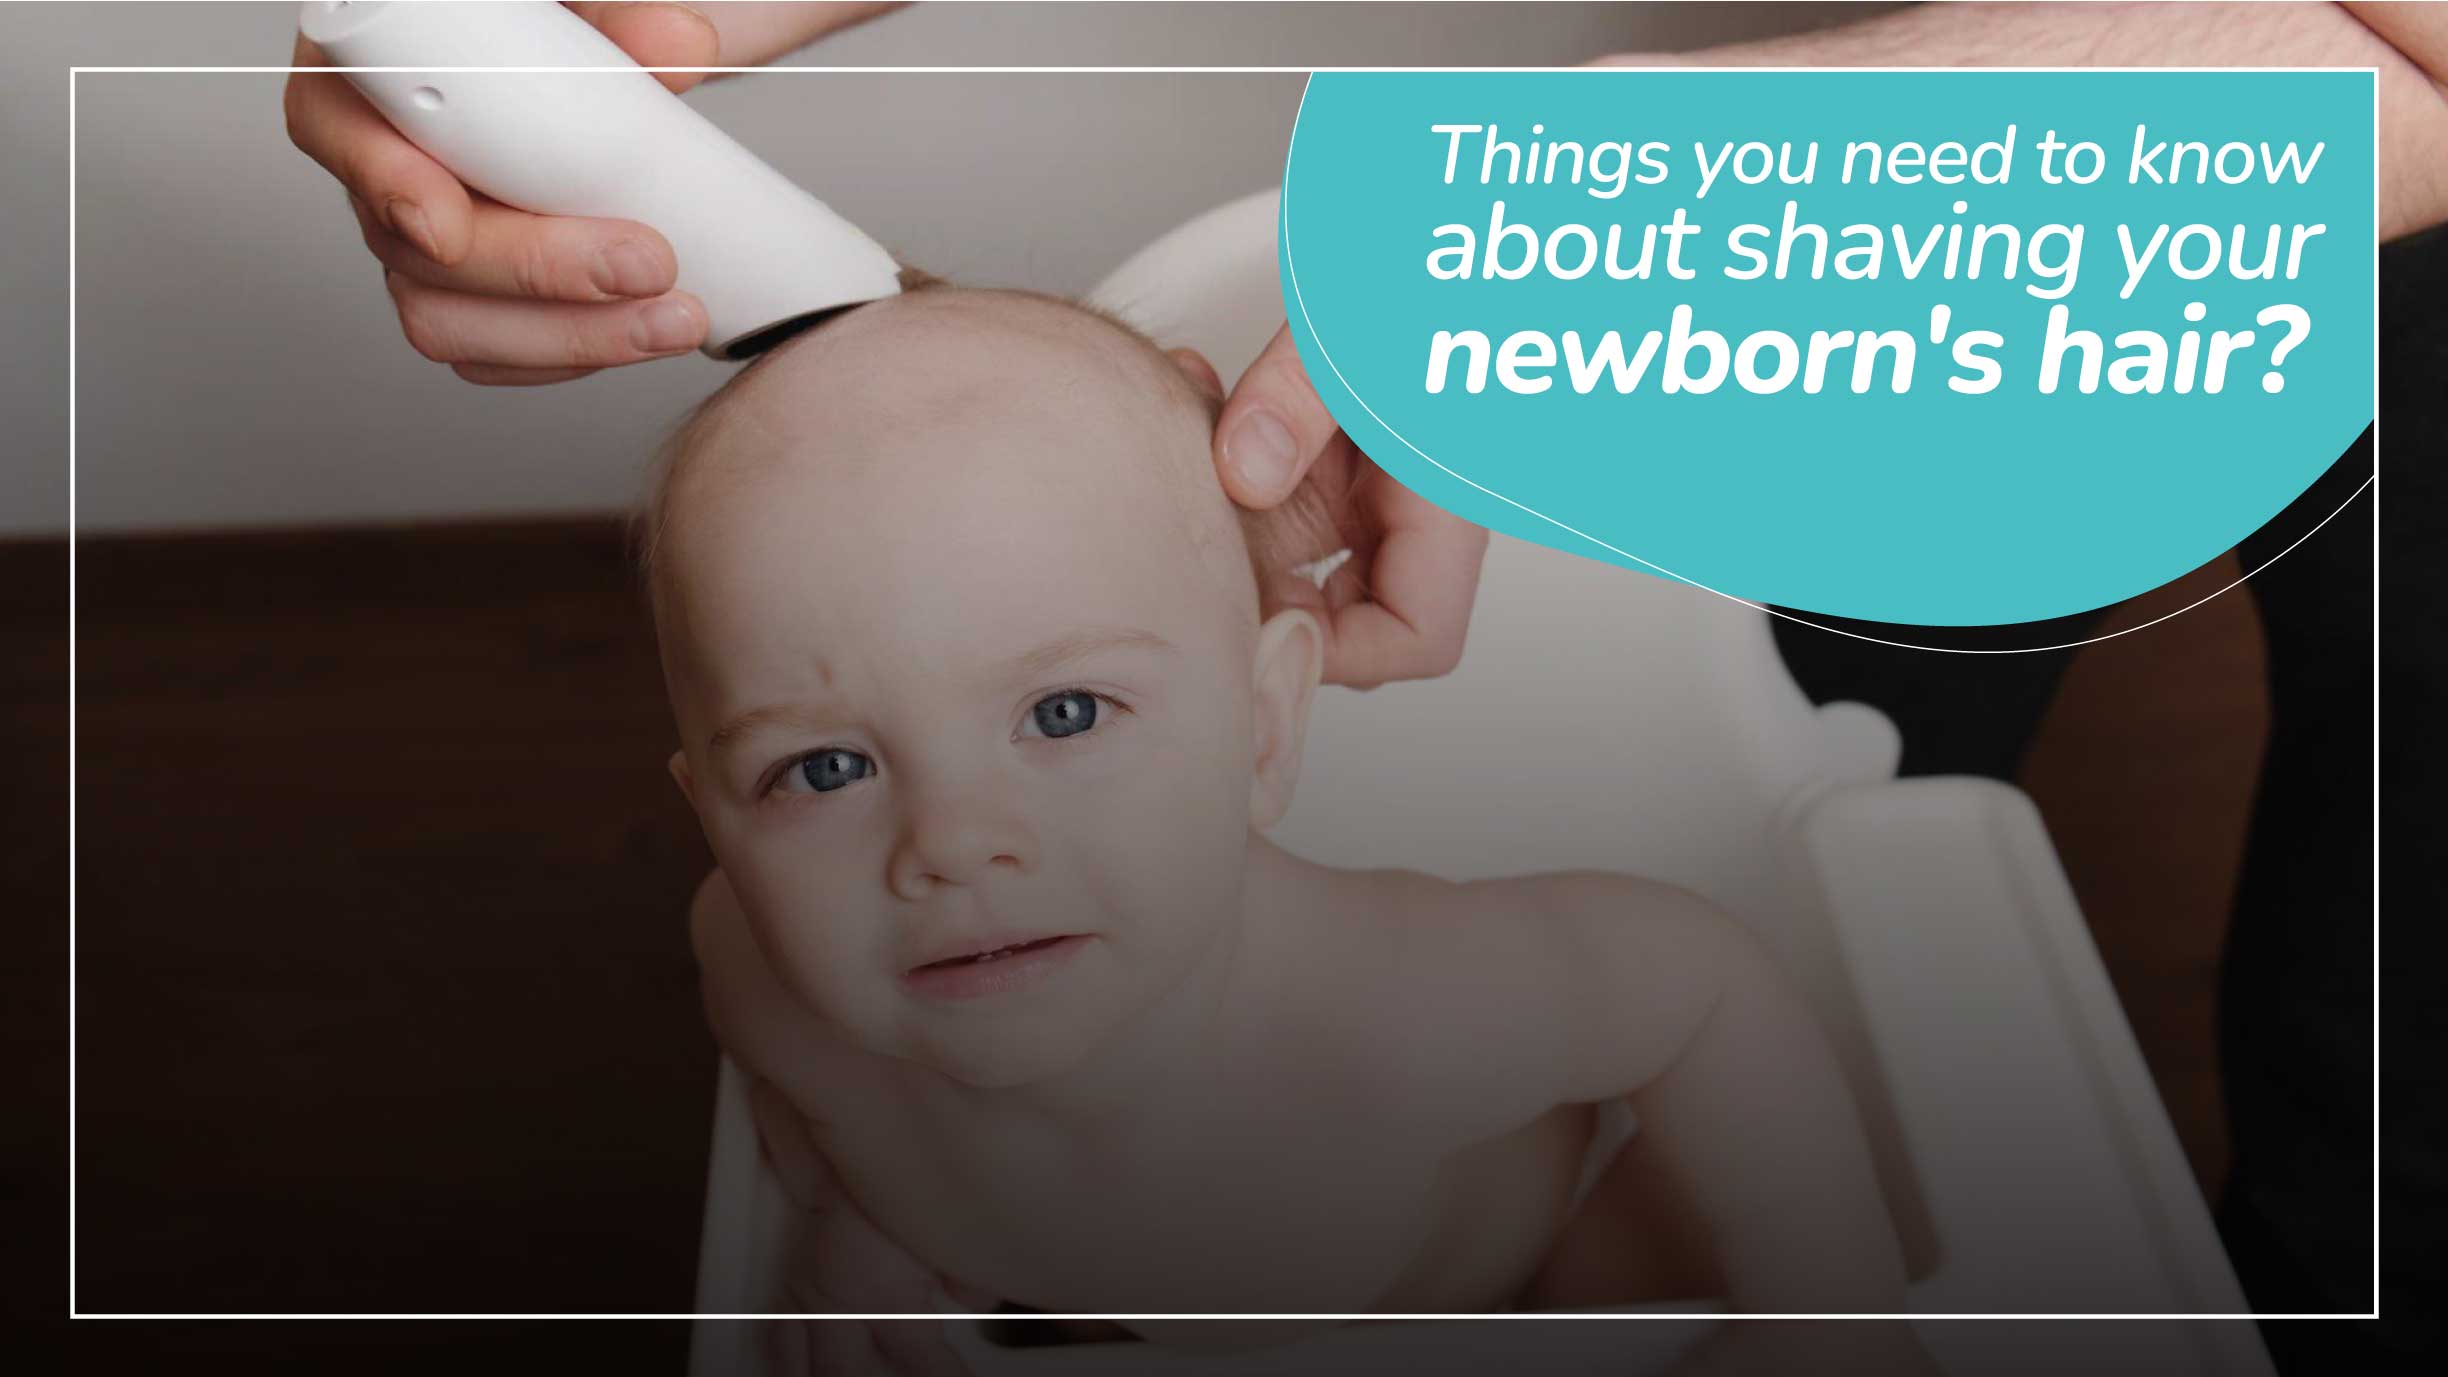 Things you need to know about shaving your newborn's hair?